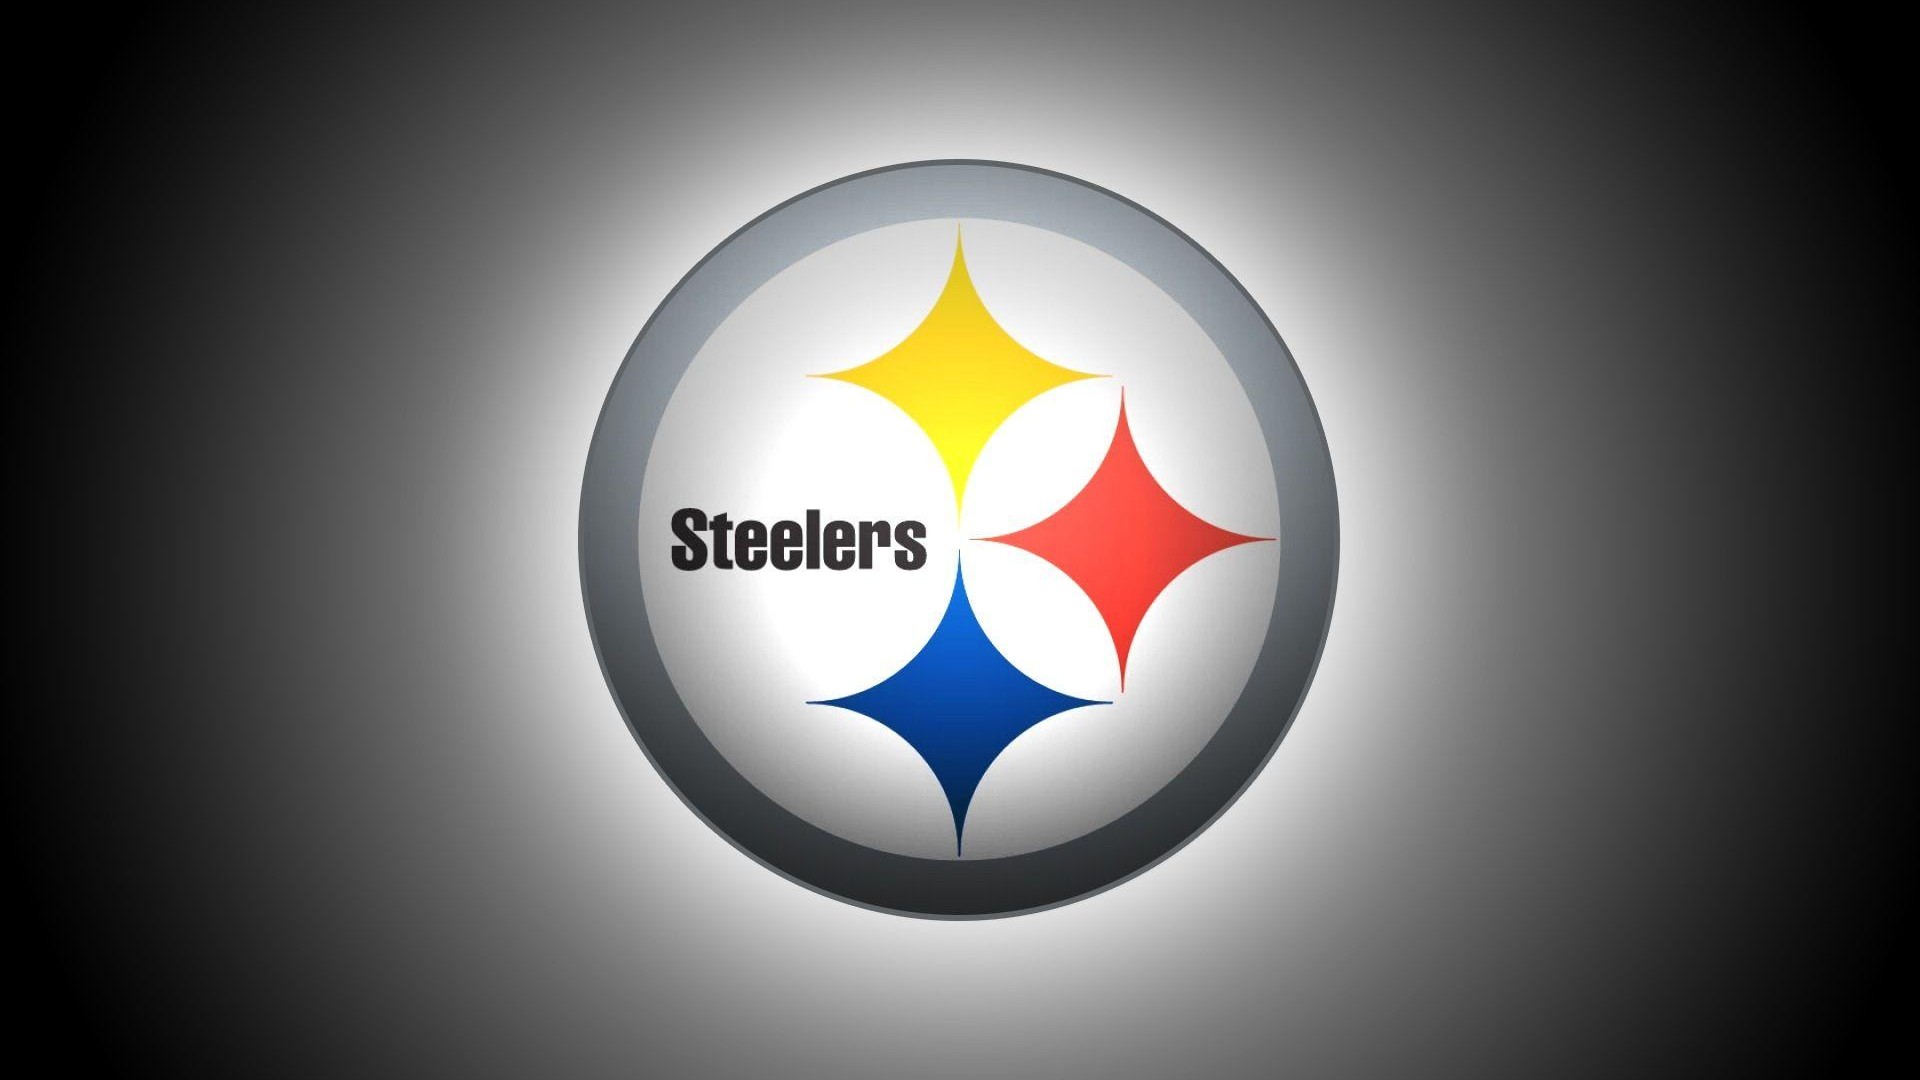 Pittsburgh Steelers Wallpaper Hd - Logos And Uniforms Of The Pittsburgh Steelers - HD Wallpaper 